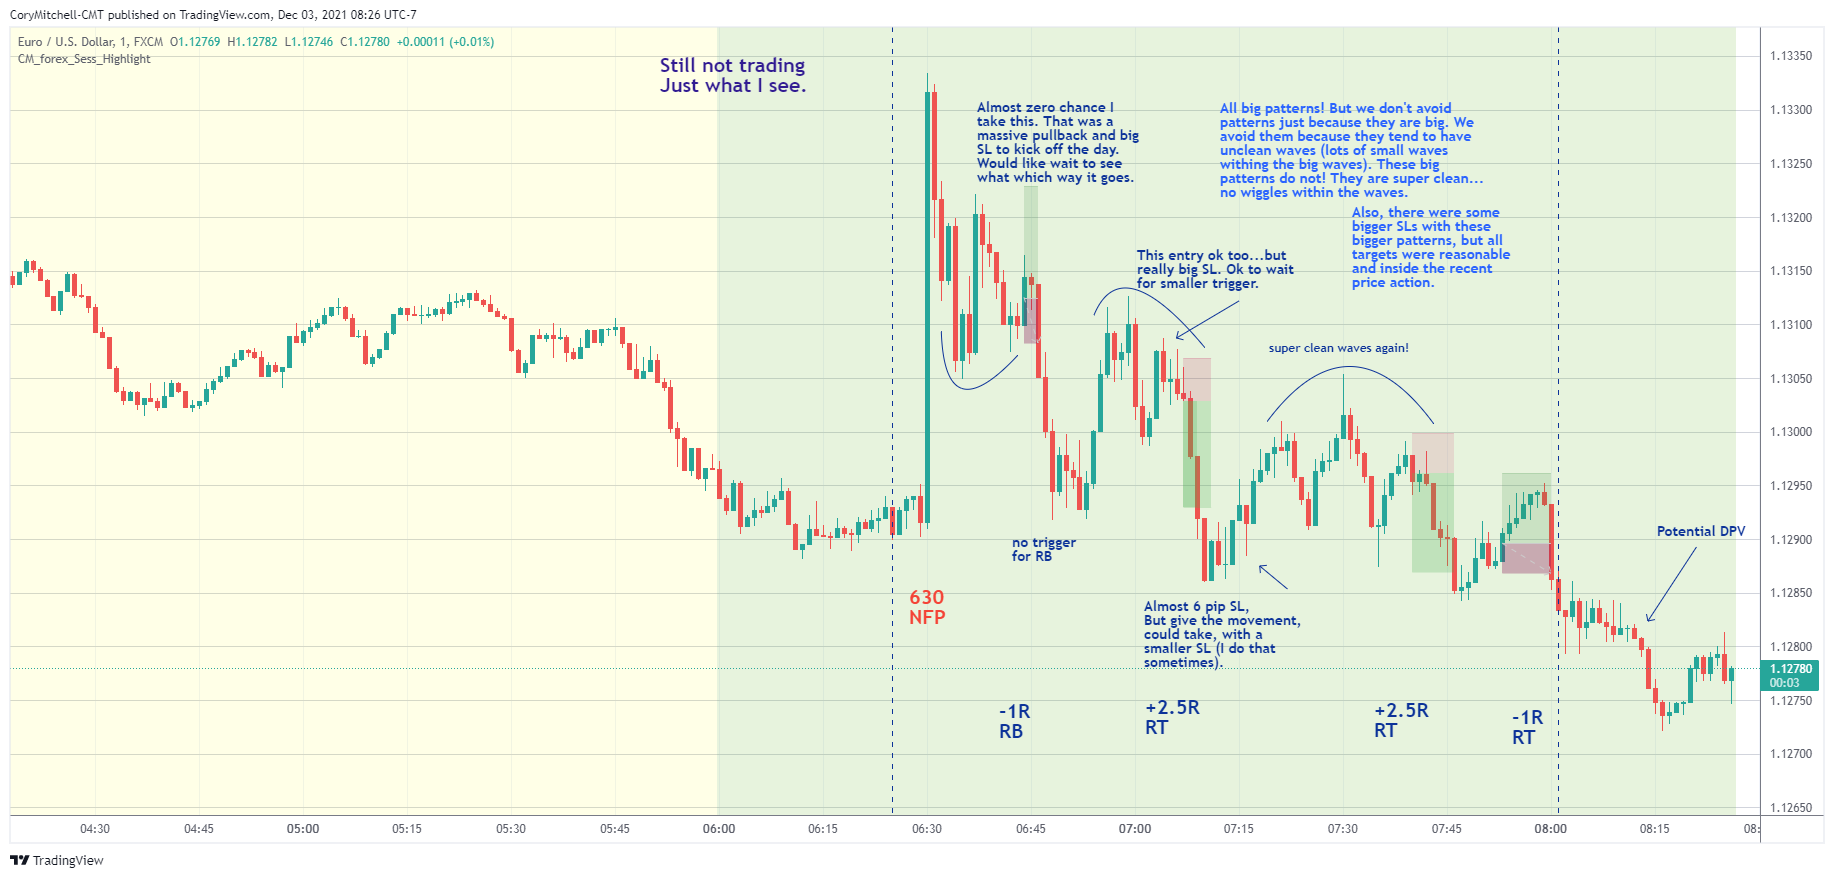 EURUSD day trading examples on 1-minute chart Dec. 3